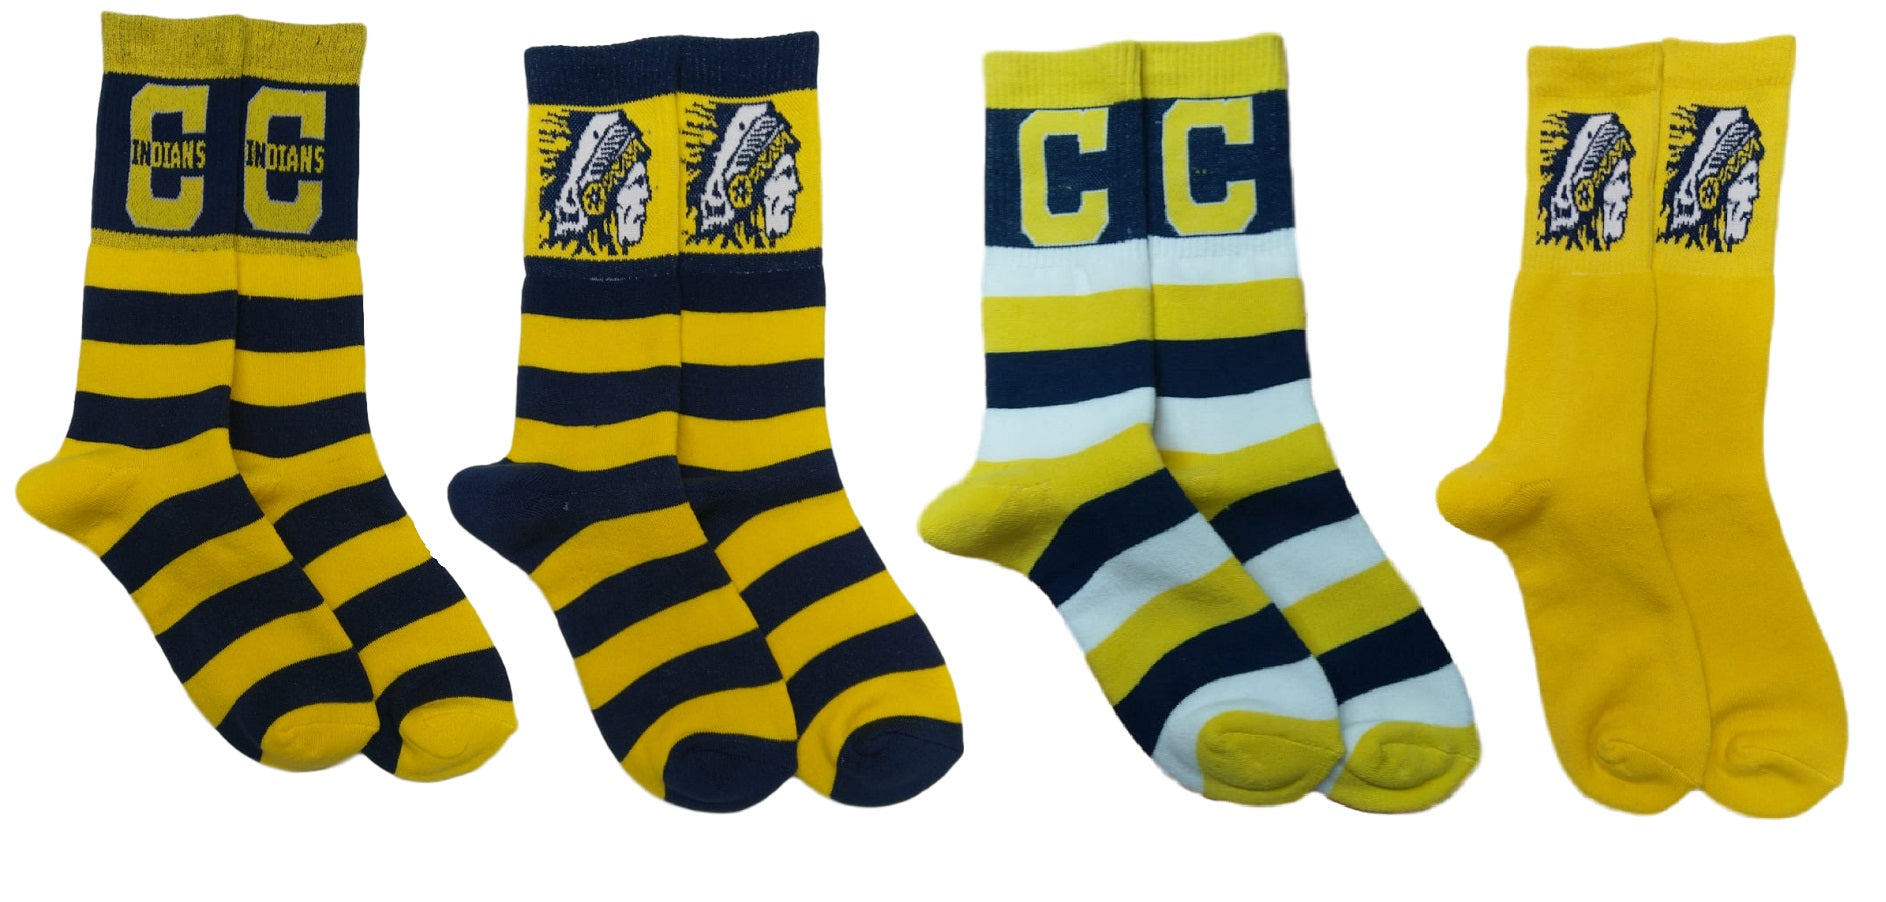 Sock Pictures – Sock Concepts